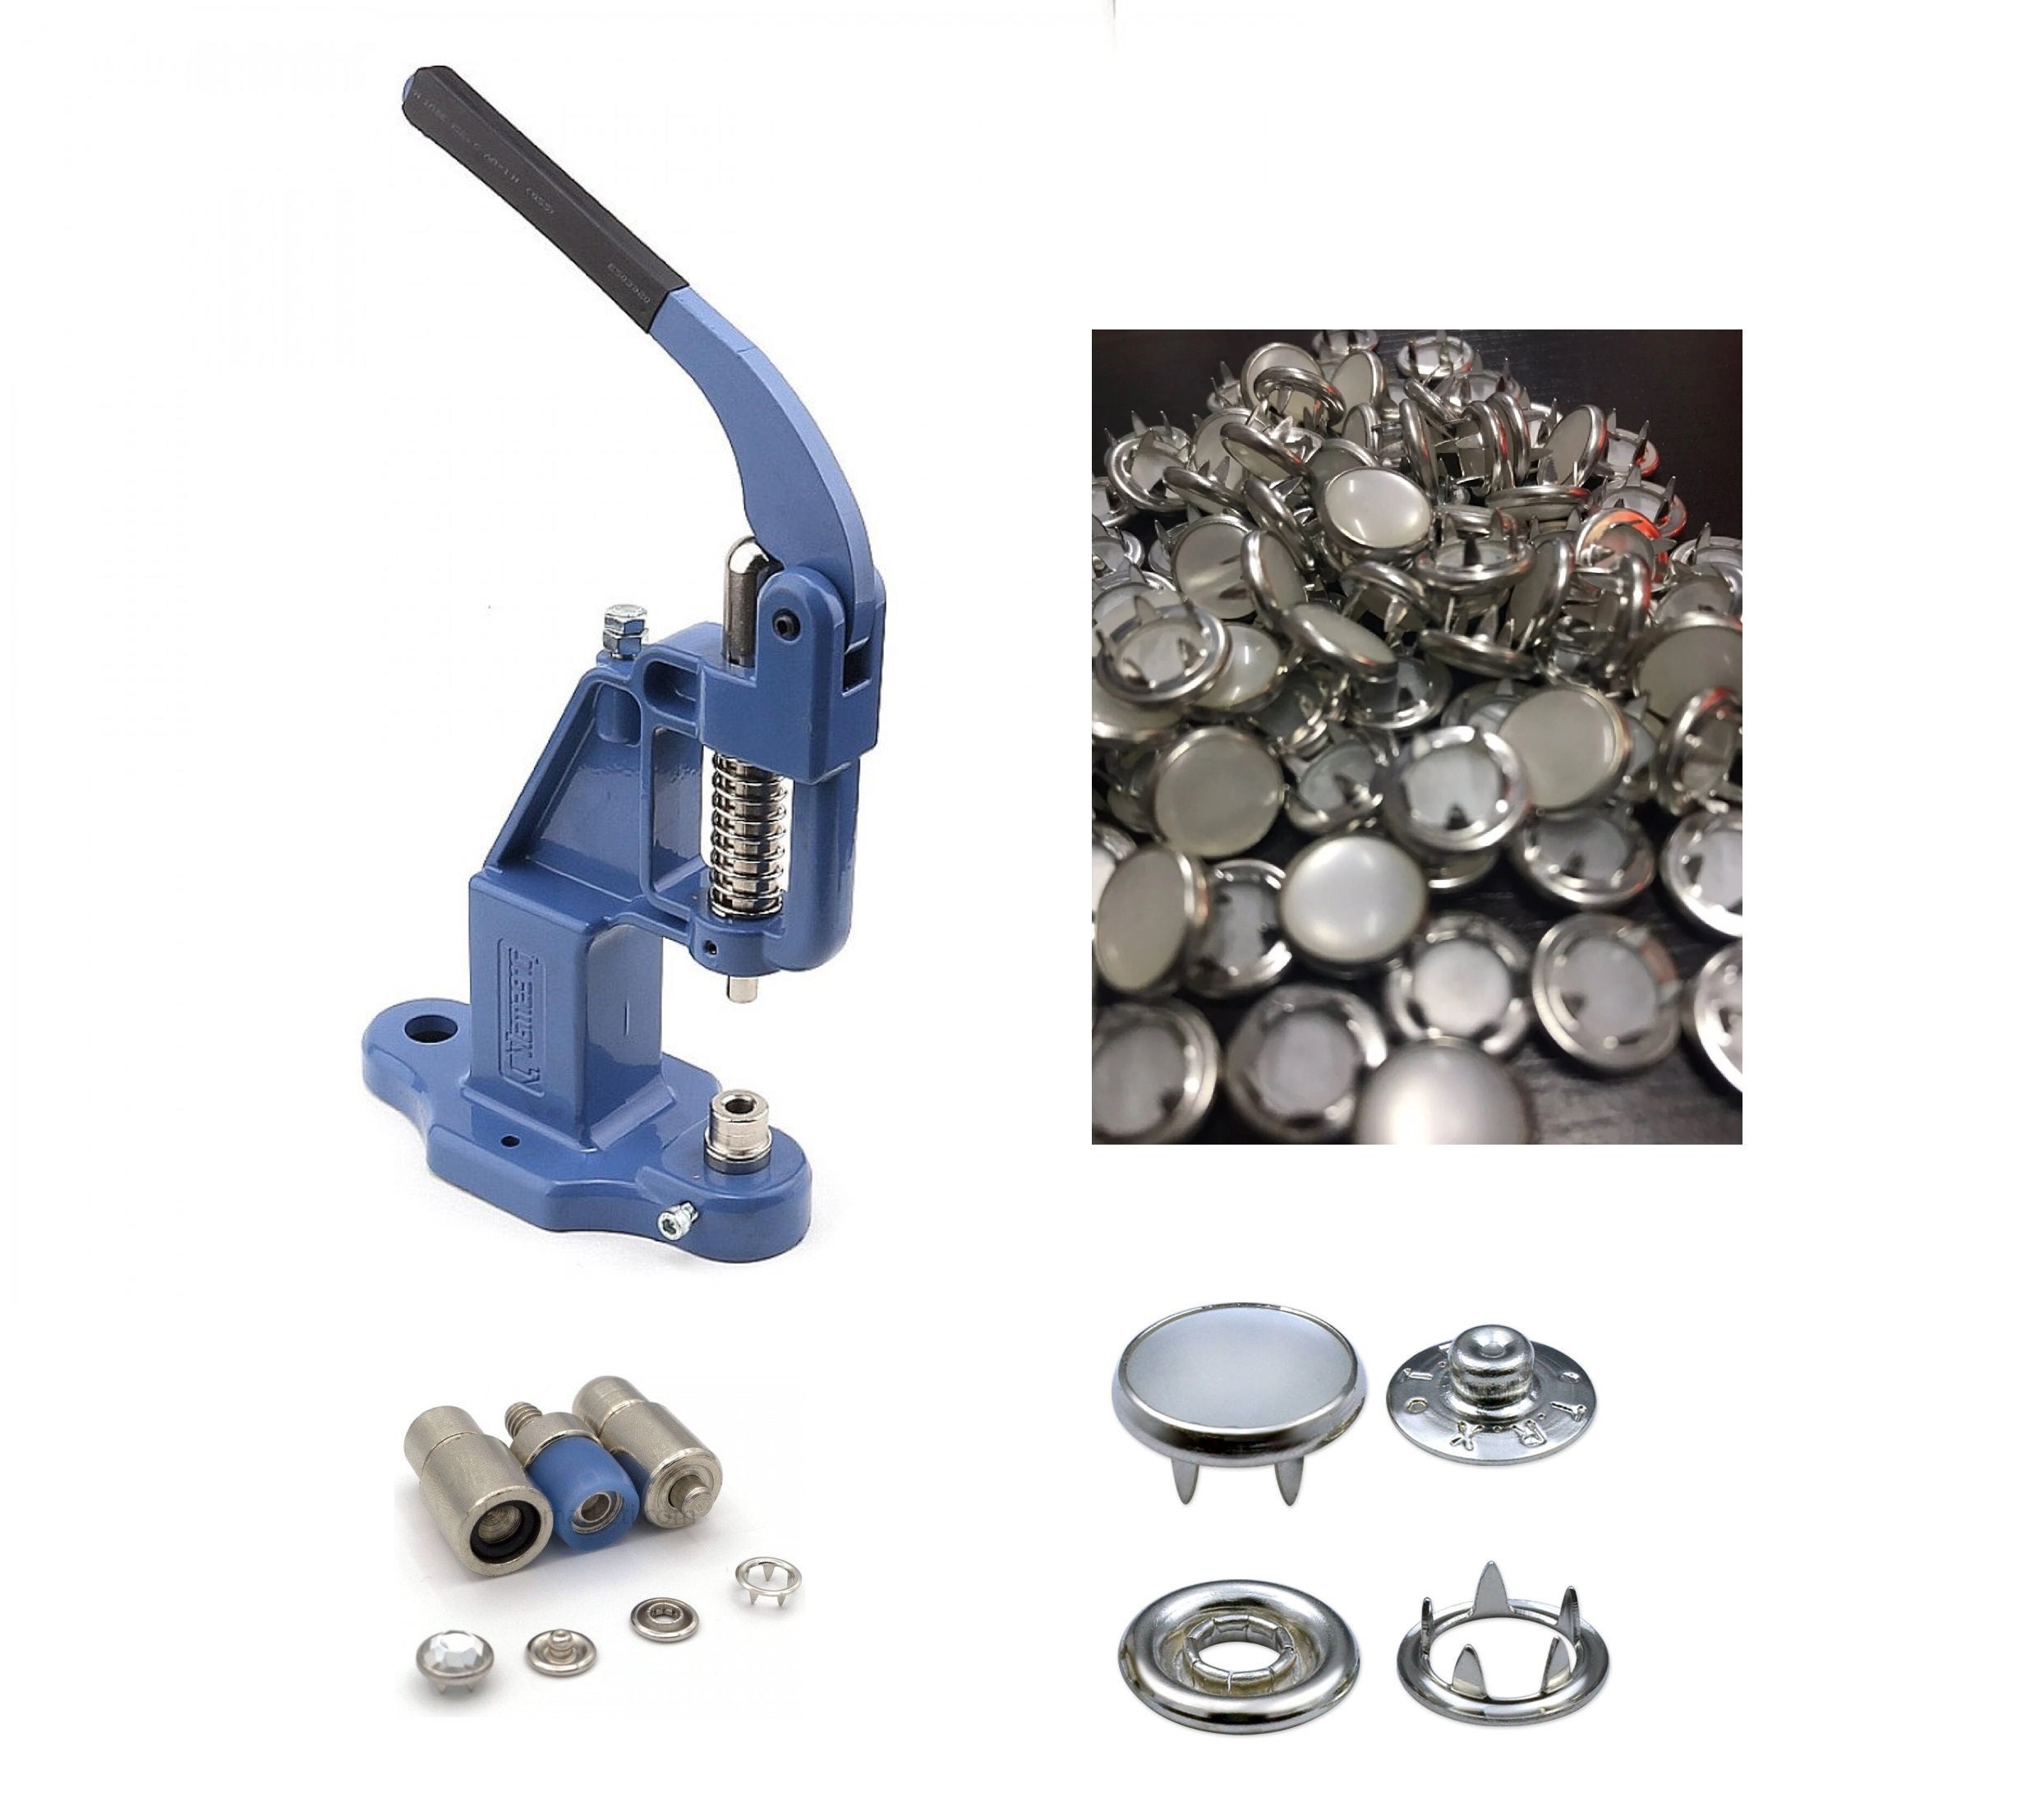 Plastic Kam Snap Fasteners Kit, Plastic Kam Snaps Button Popper Stud Sewing  Leather Craft Clothing Hand Press Machine and Die 